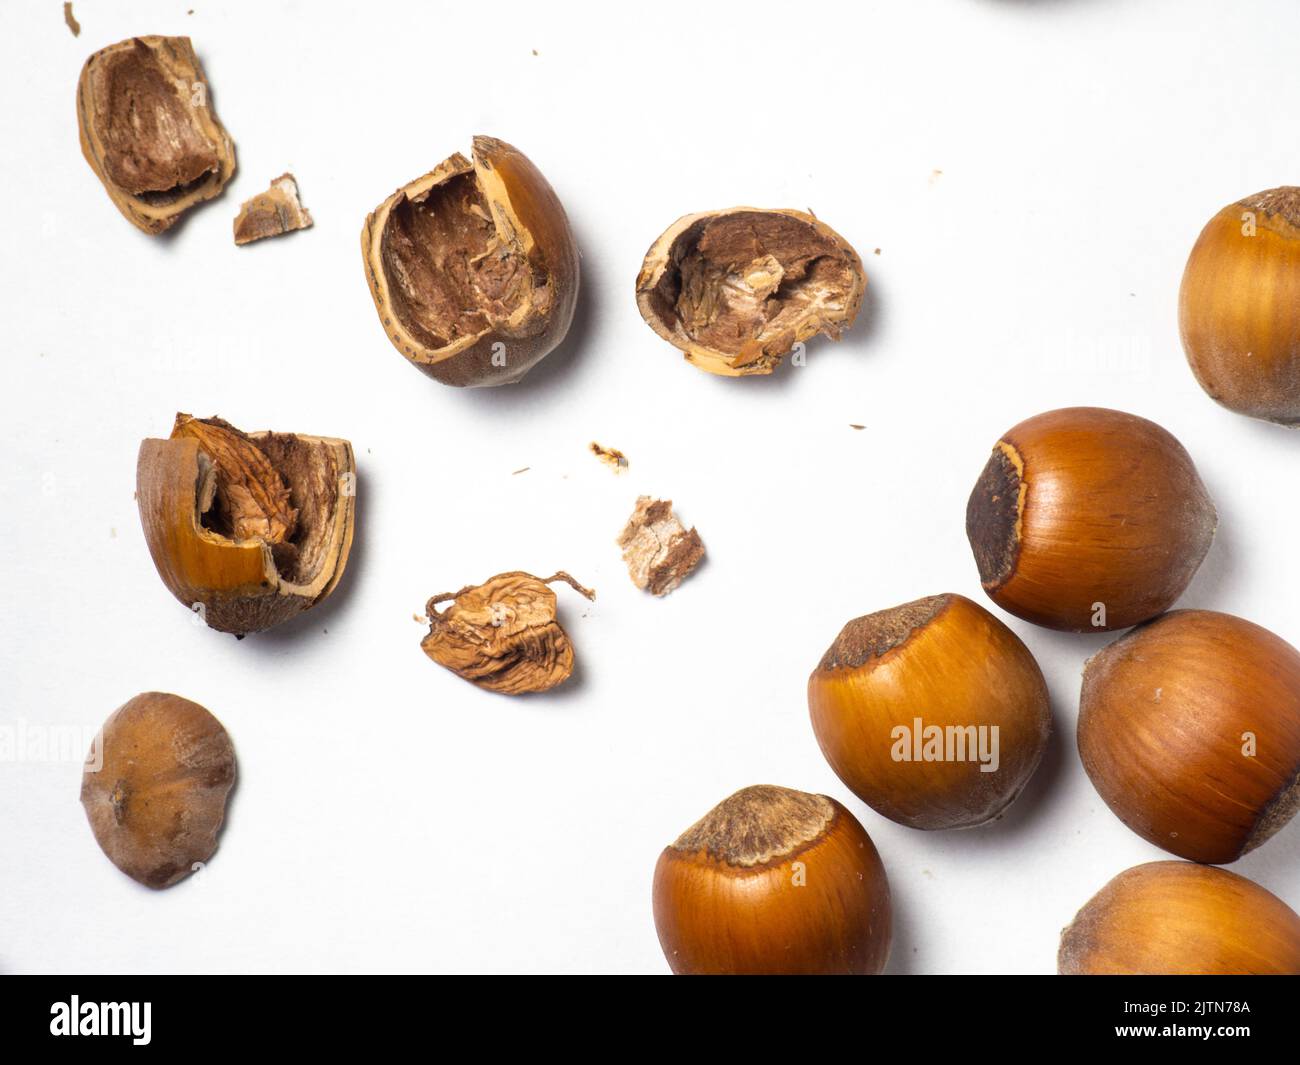 Hazelnuts on a white background. Nuts in a shell. Snack. Healthy diet. Ingredients for preparing a healthy lunch. Broken walnut. Stock Photo